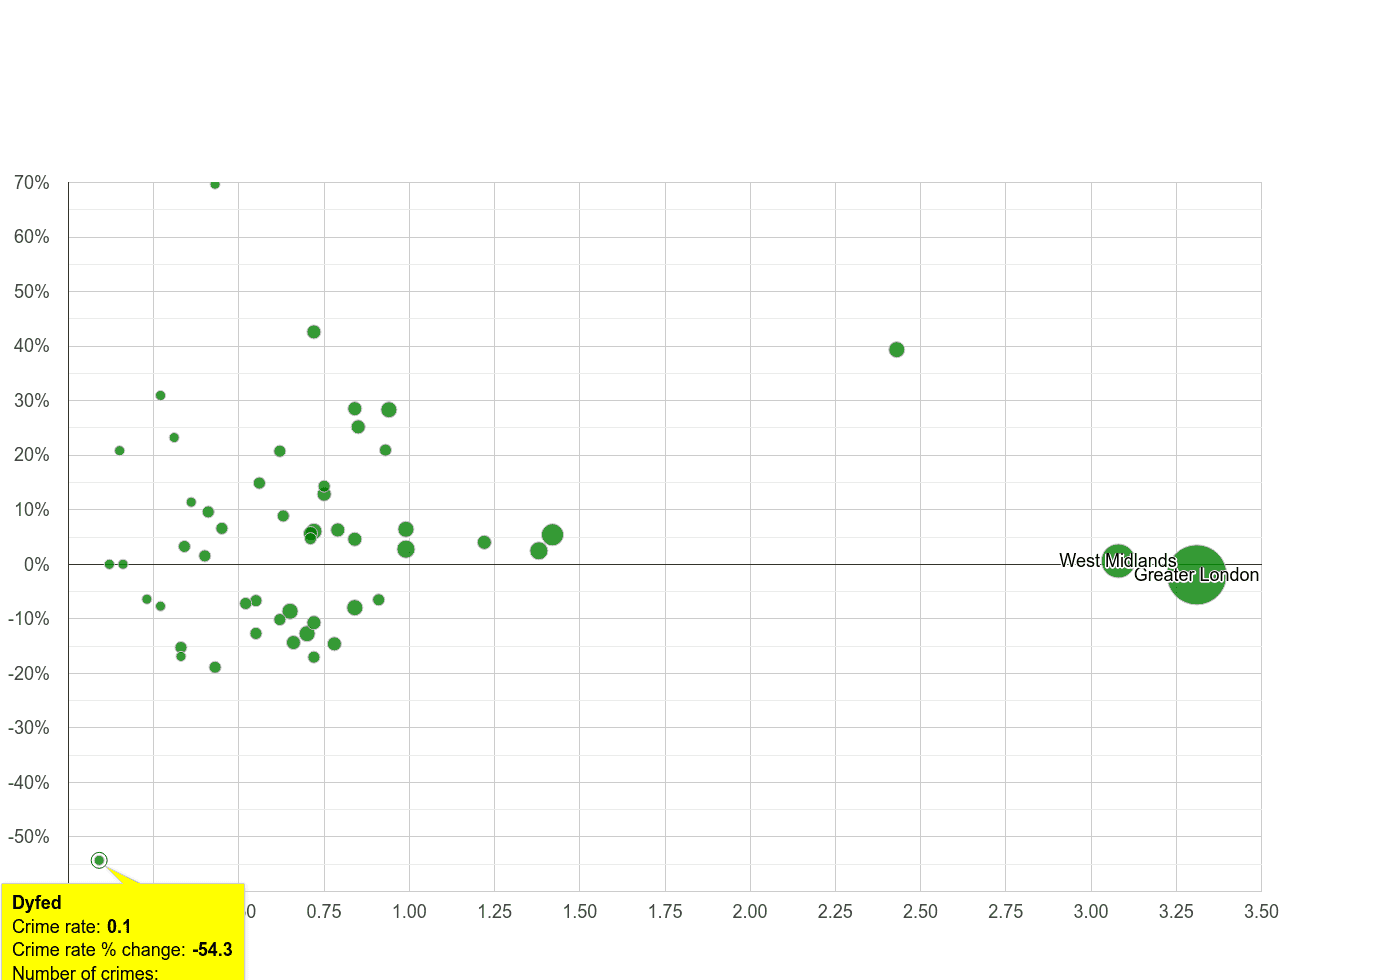 Dyfed robbery crime rate compared to other counties